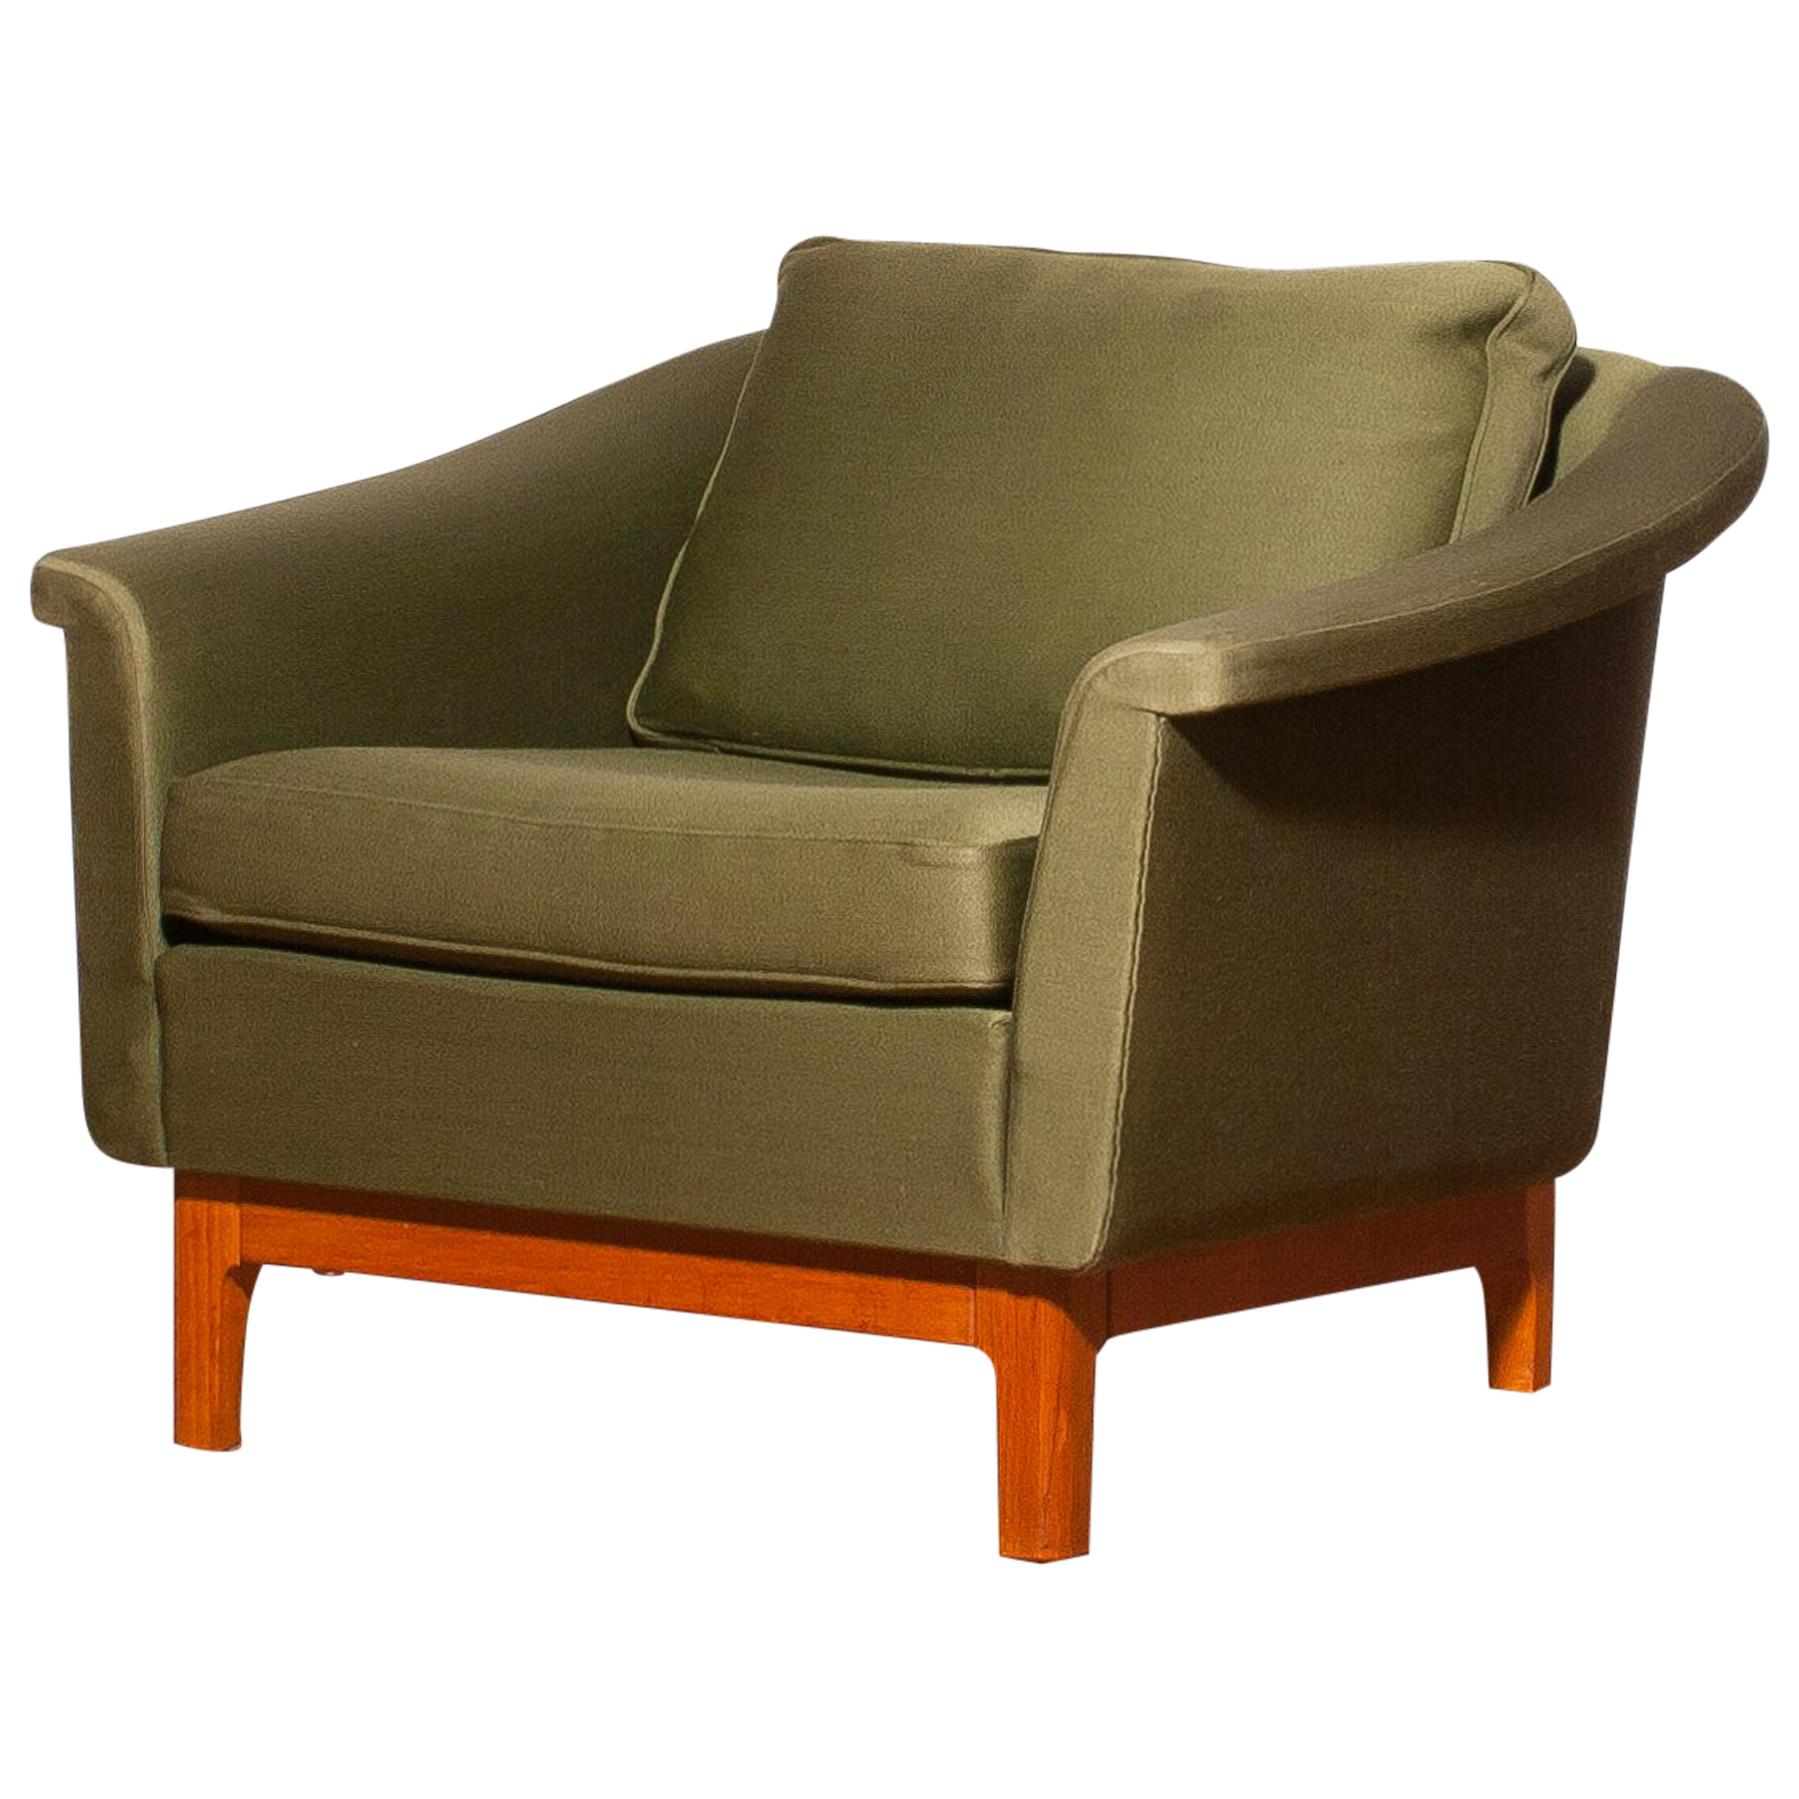 Swedish 1960s, Green Lounge Chair by Folke Ohlsson for DUX